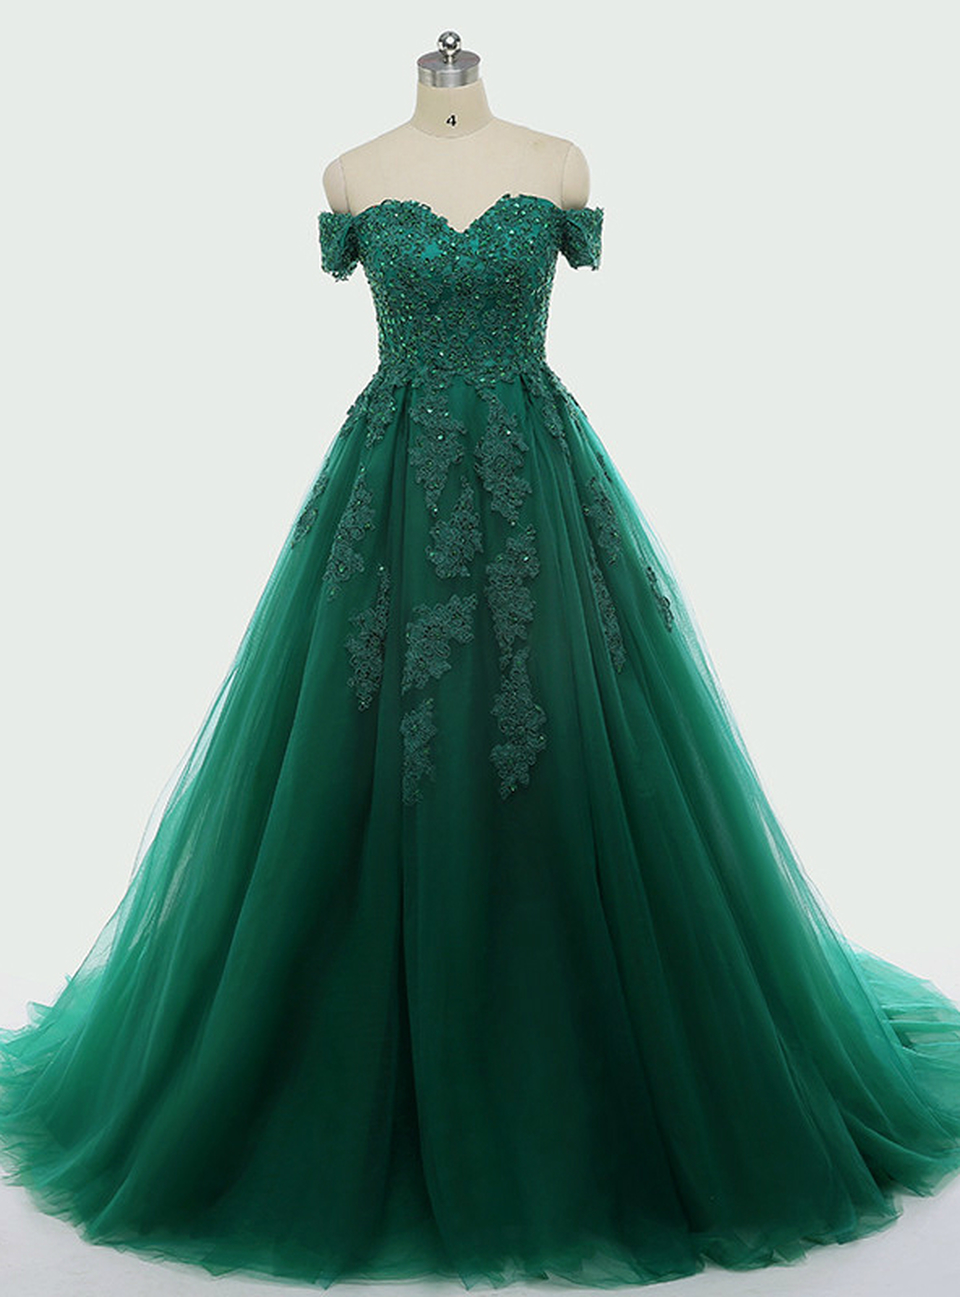 Green Prom Dress Off Shoulder Party Dress Tulle Evening Dress,custom Made